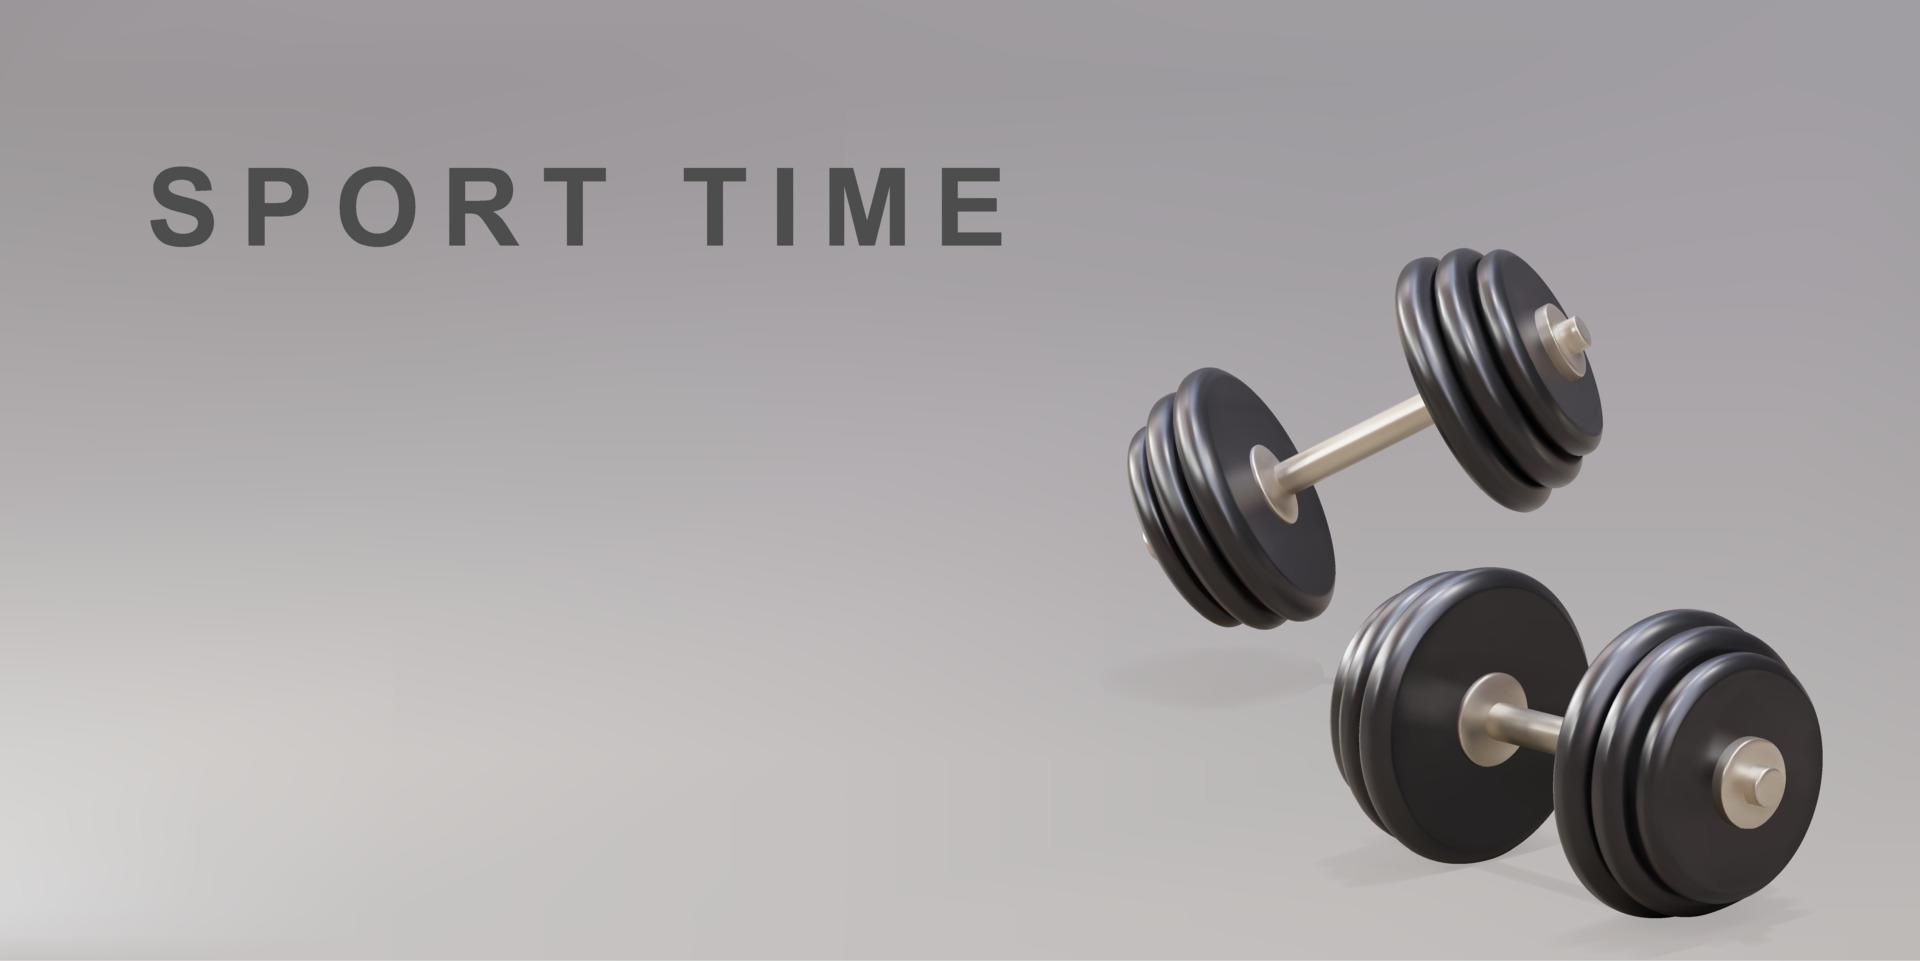 3d two dumbbells isolated on gray background. Vector illustration.